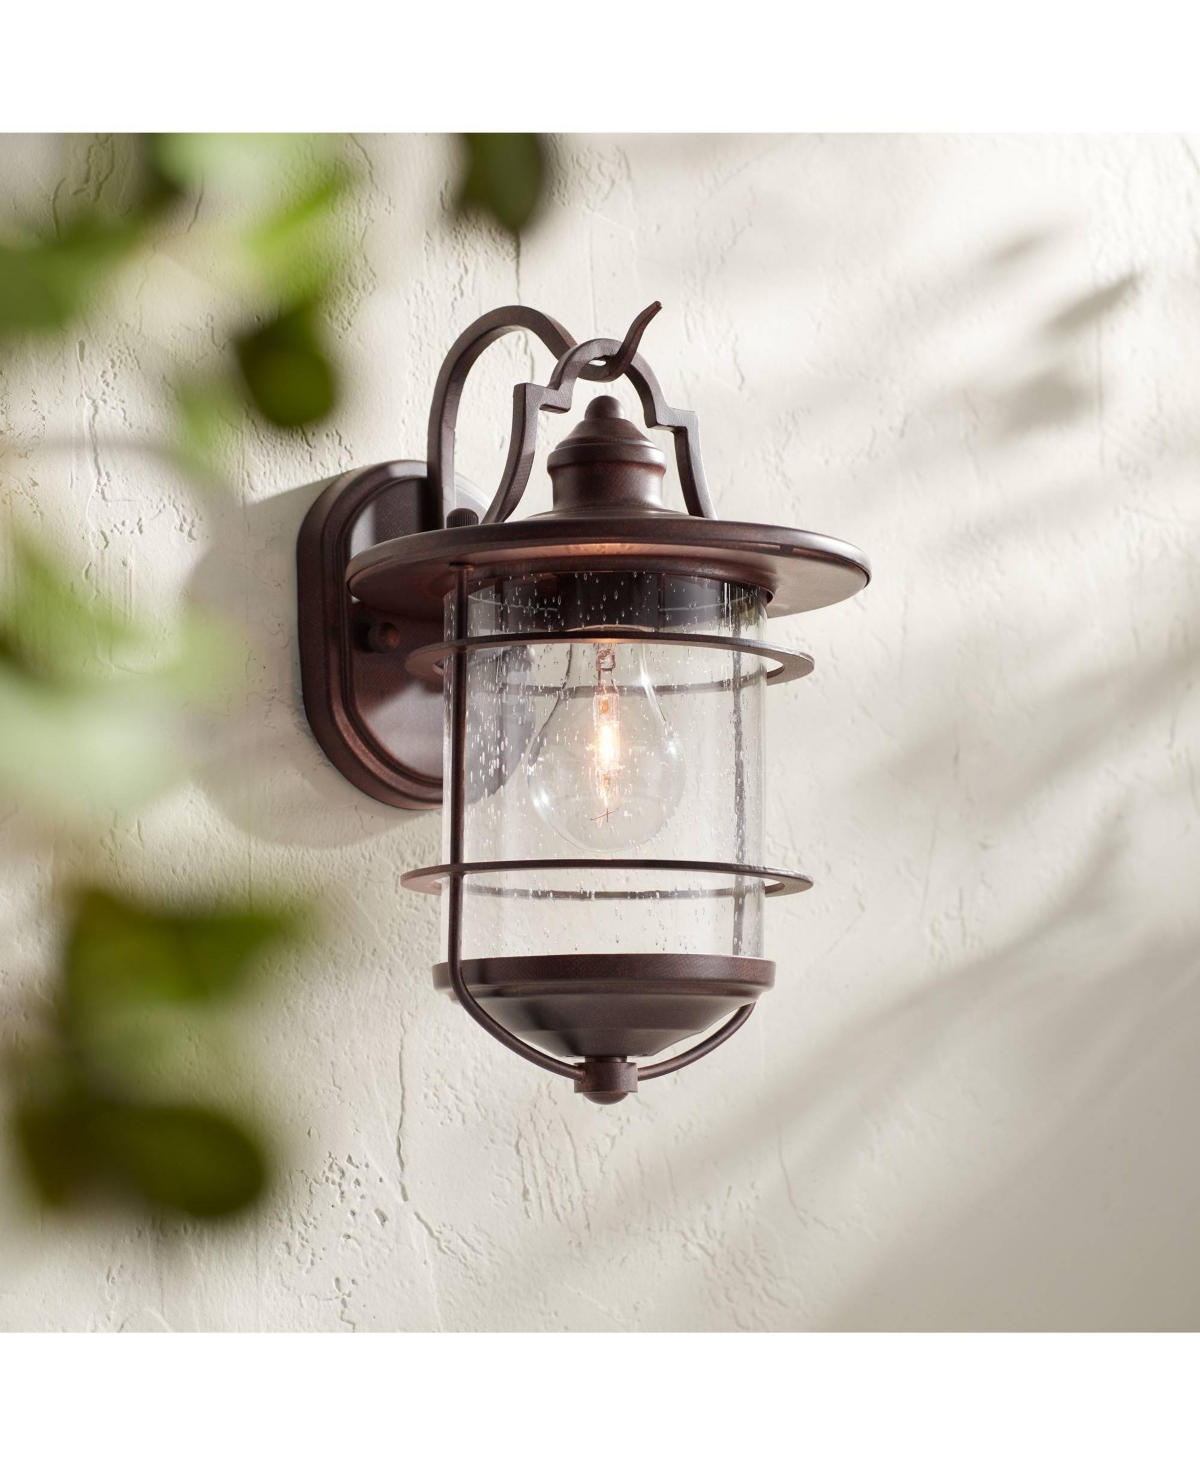 Casa Mirada Rustic Industrial Outdoor Wall Light Fixture Vintage-like Bronze Metal 12" Clear Seedy Glass Decor for Exterior House Porch Patio Outside